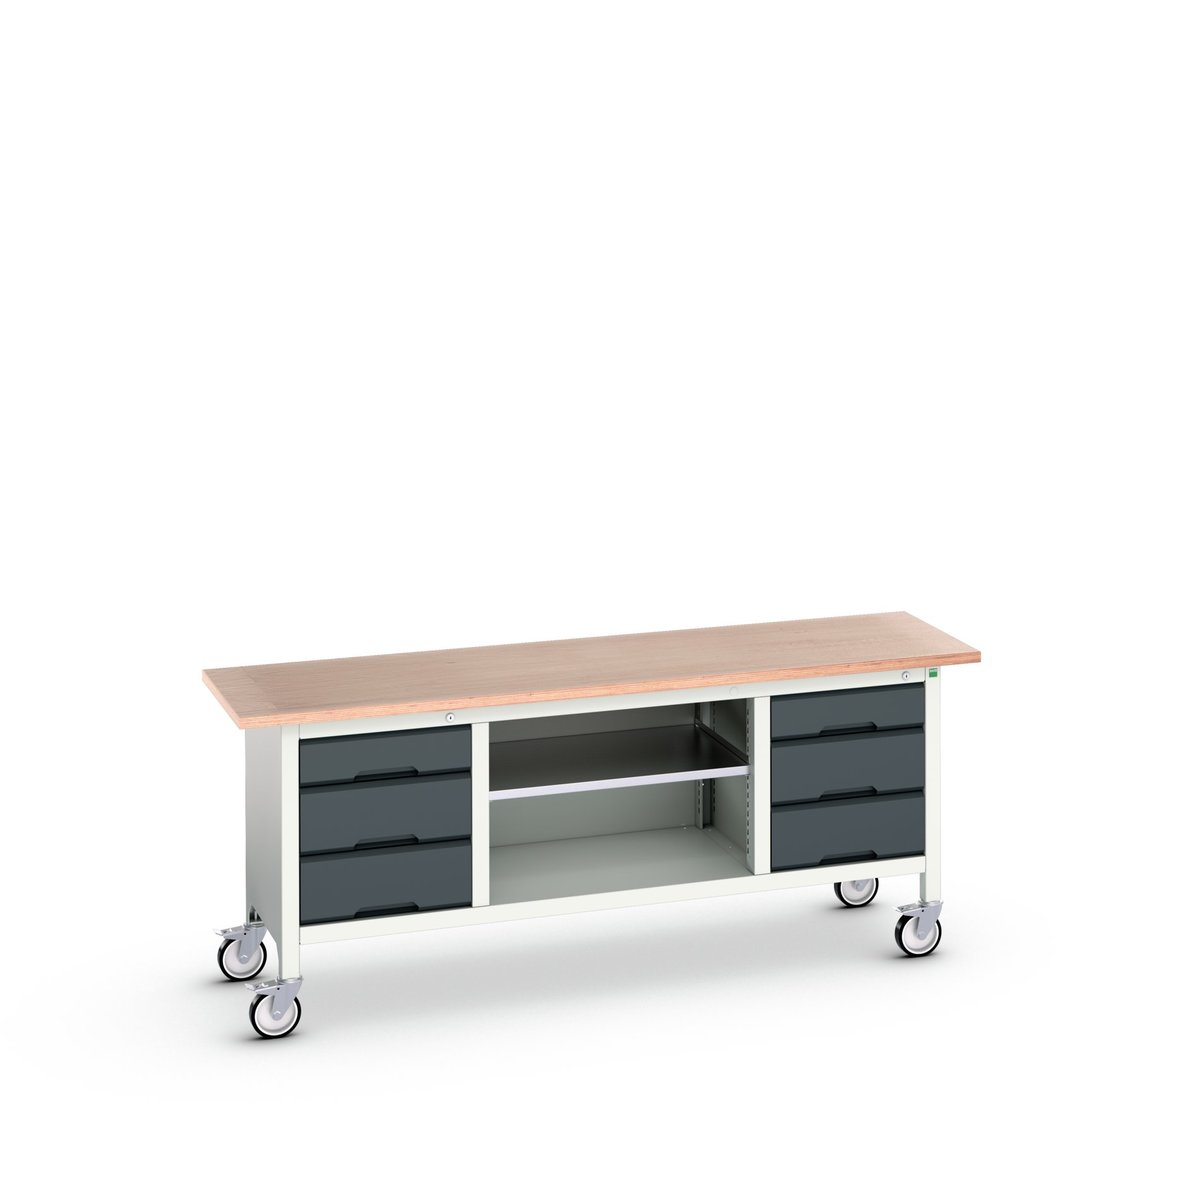 16923234. - verso mobile storage bench (mpx)